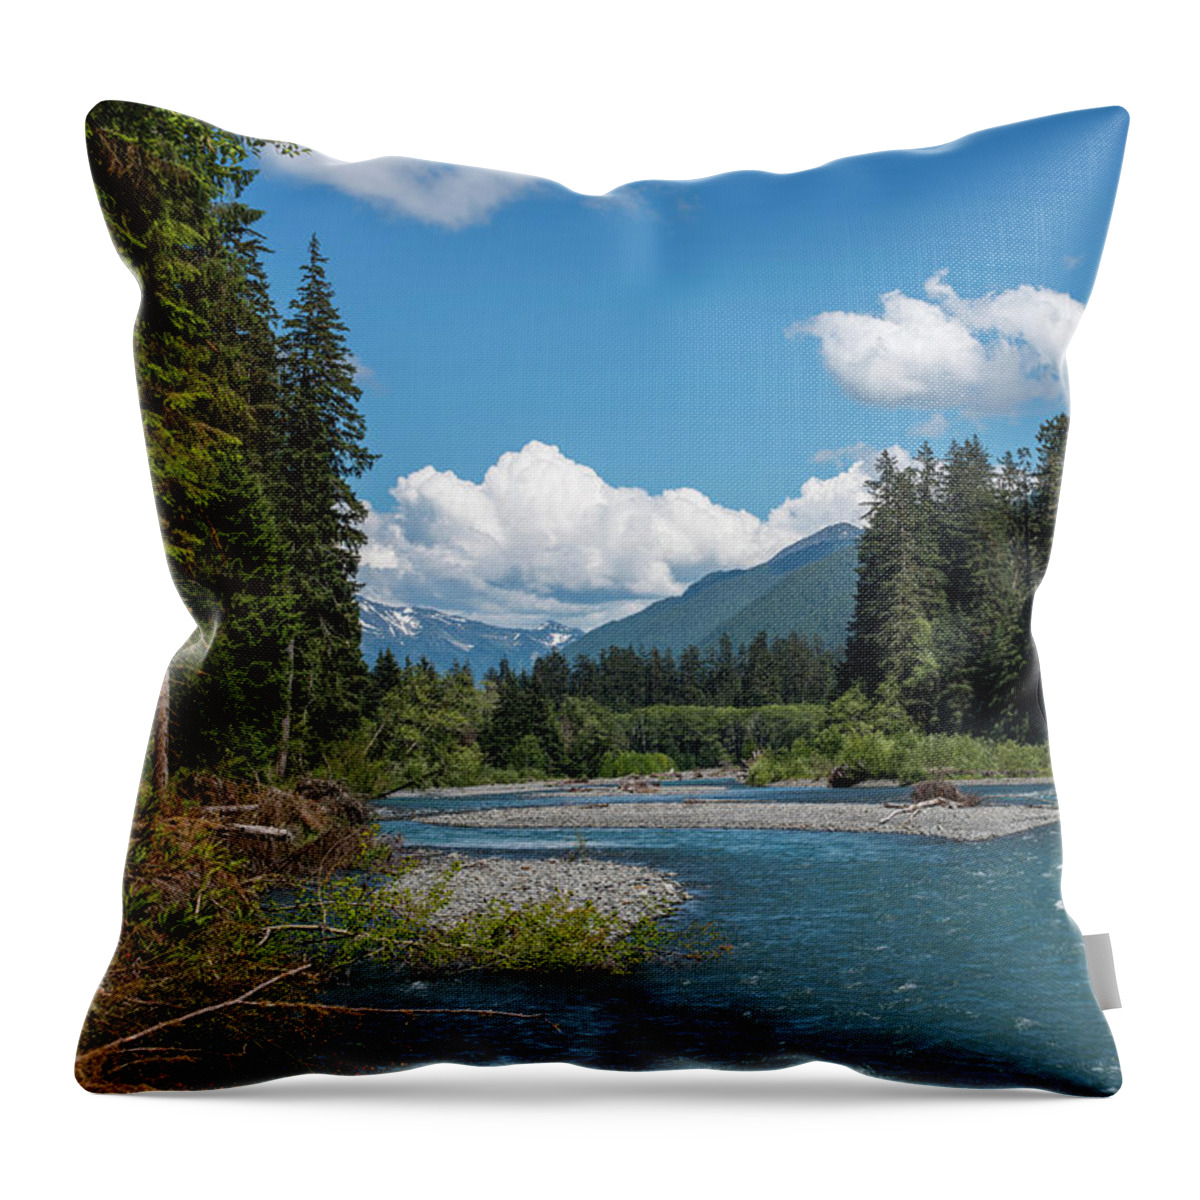 Clouds Throw Pillow featuring the photograph Hoh River by Robert Potts